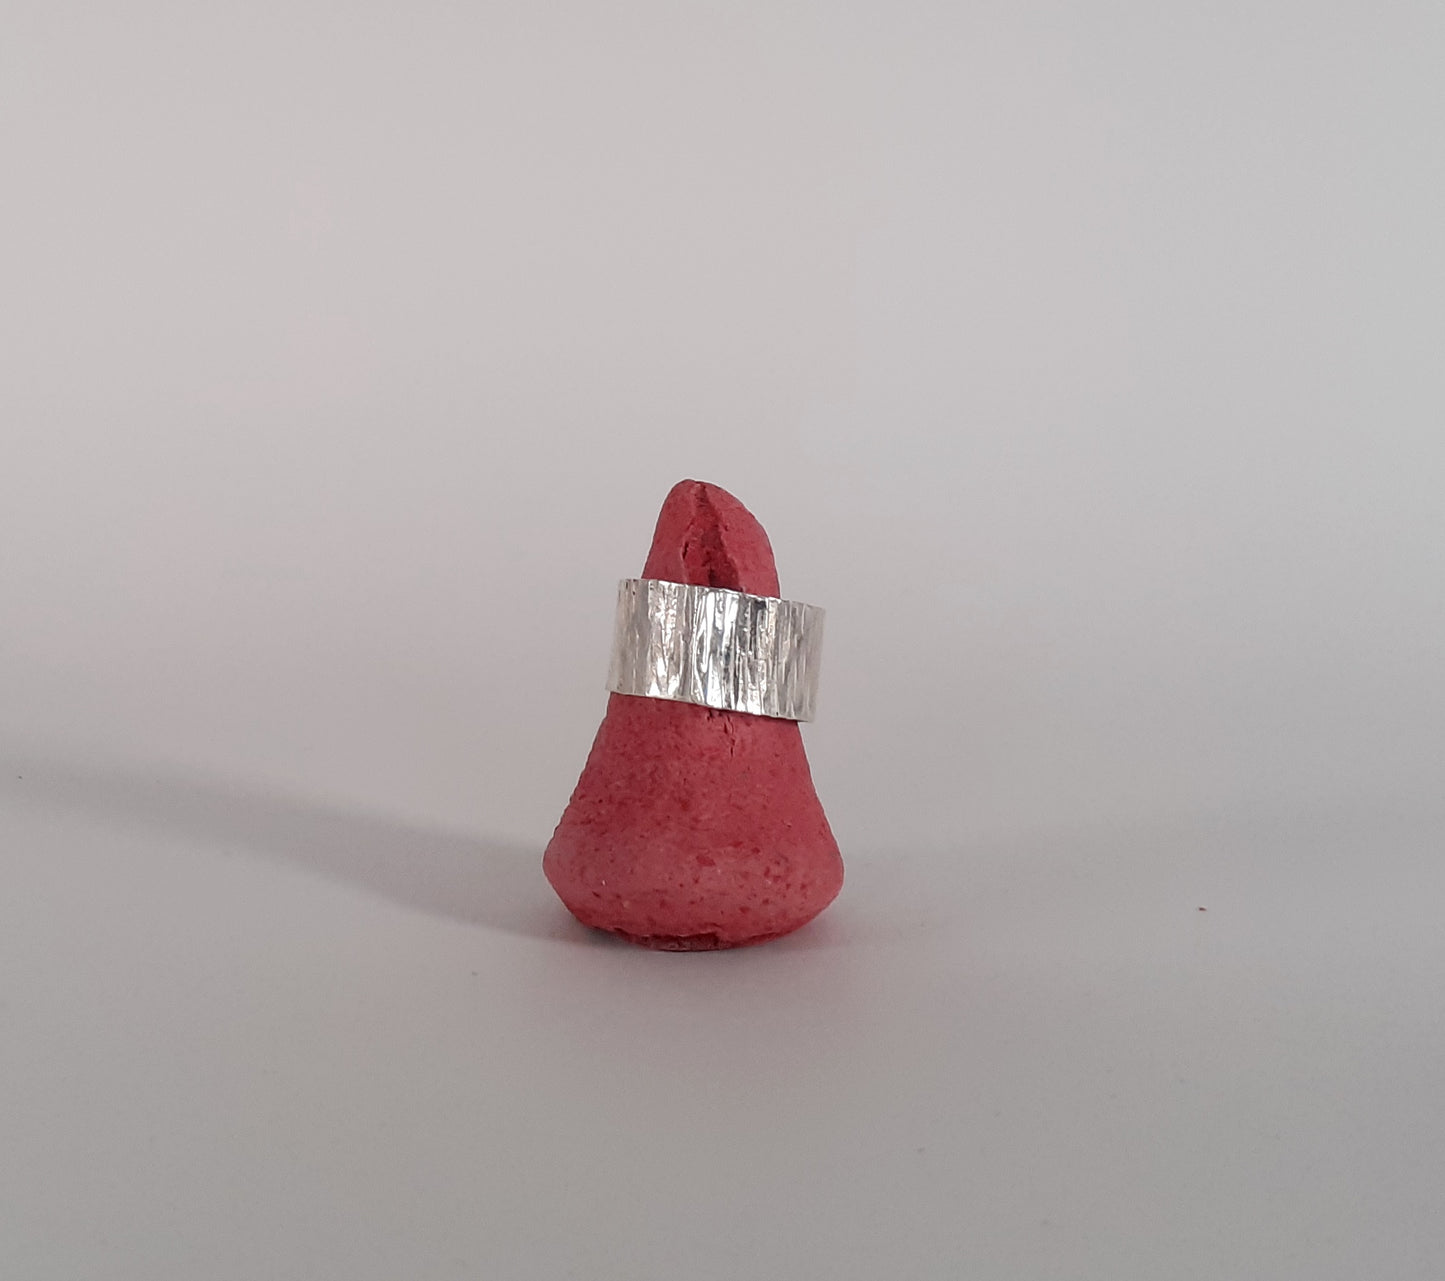 Adjustable Silver Ring #10